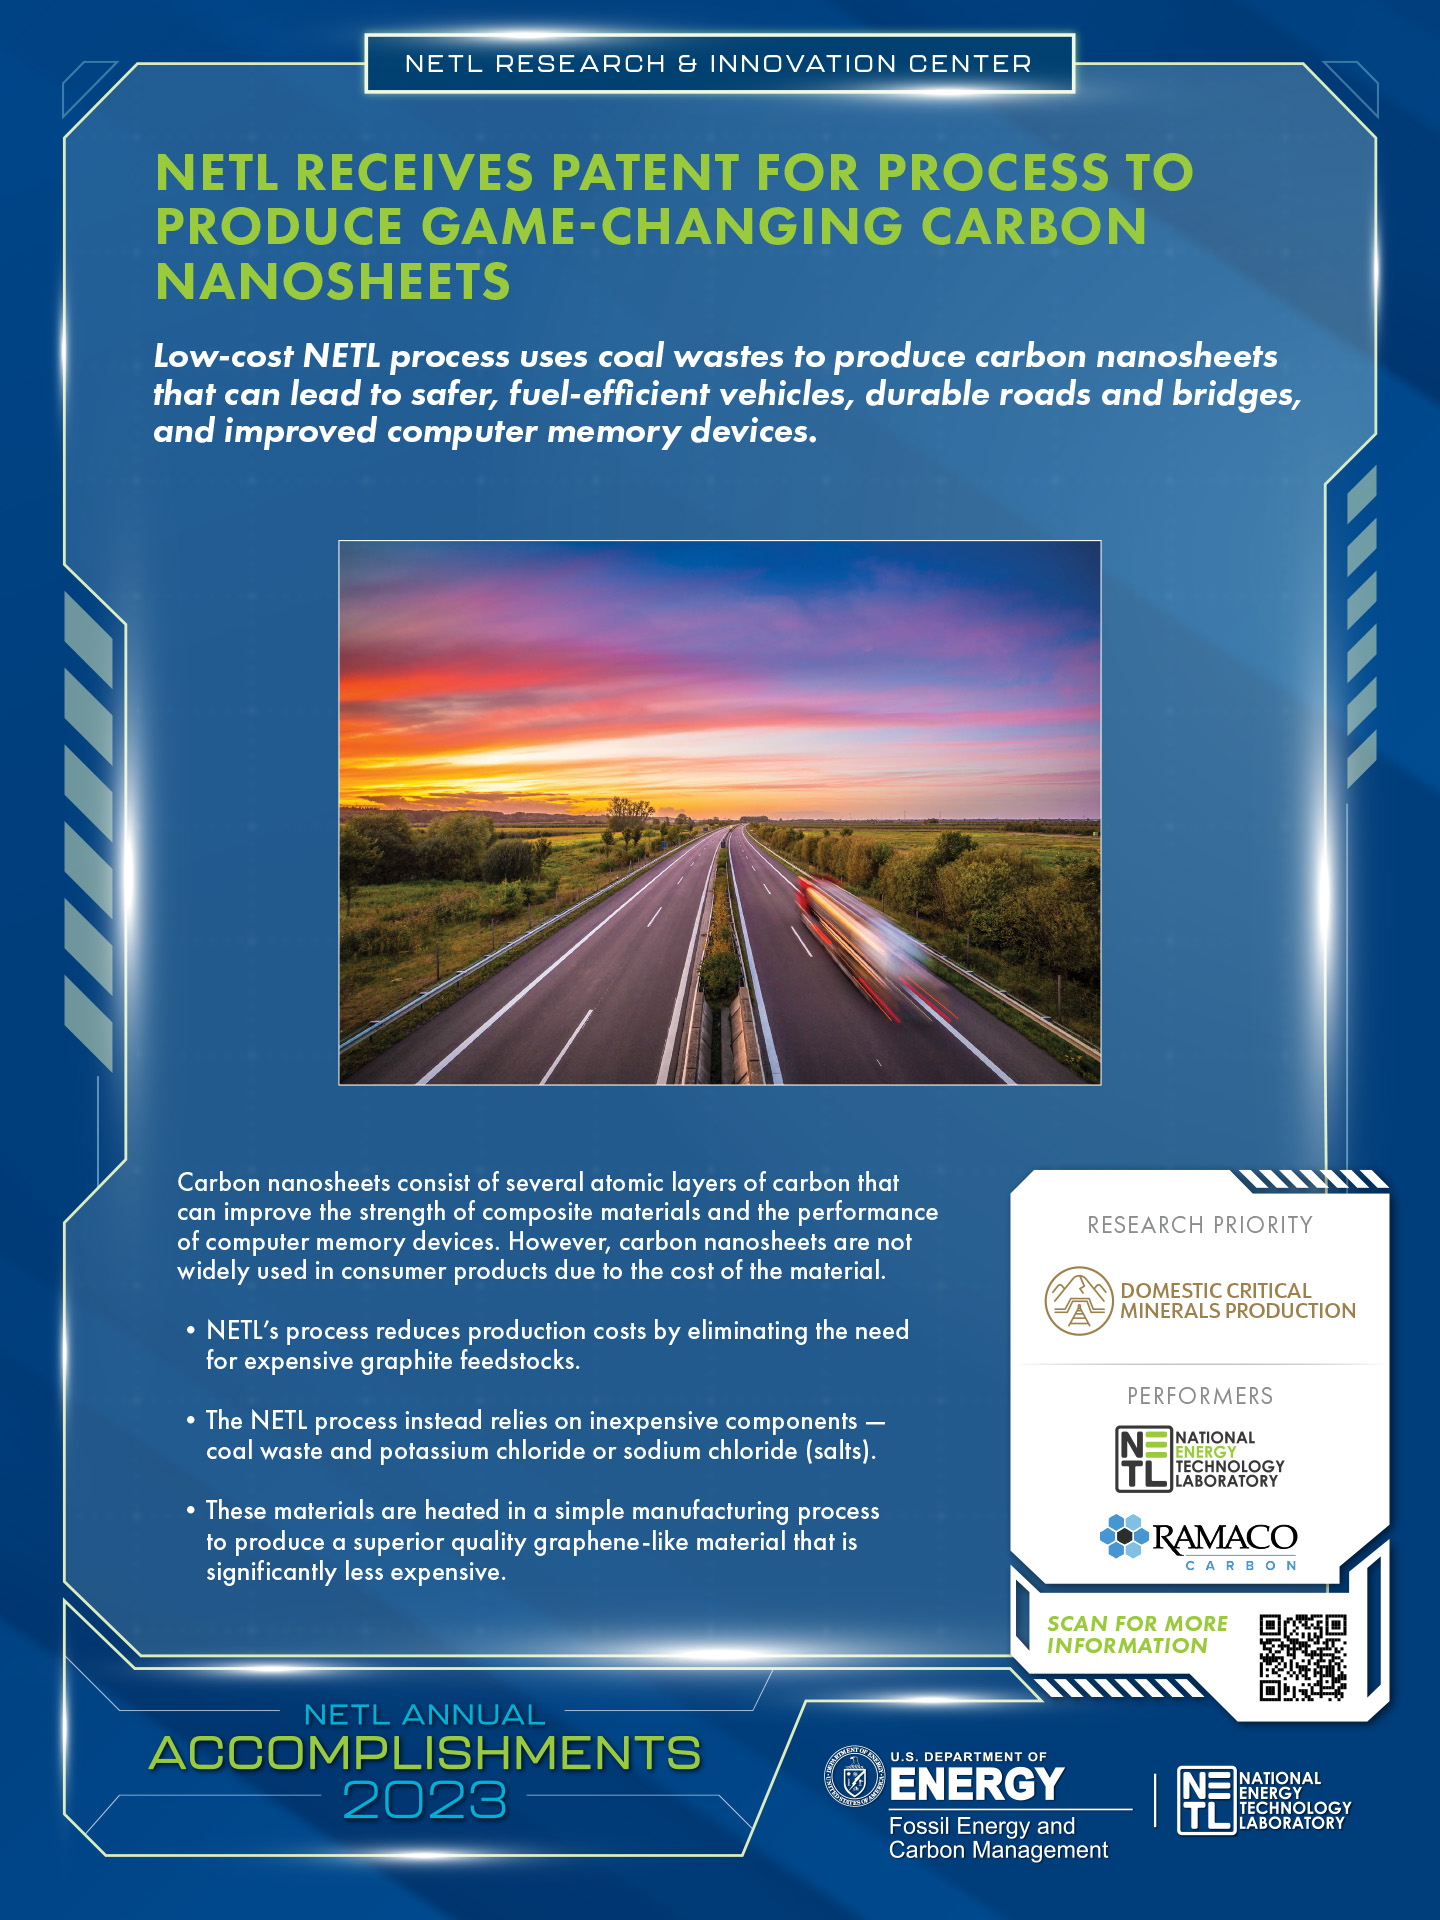 NETL Receives Patent for Process to Produce Game-Changing Carbon Nanosheets